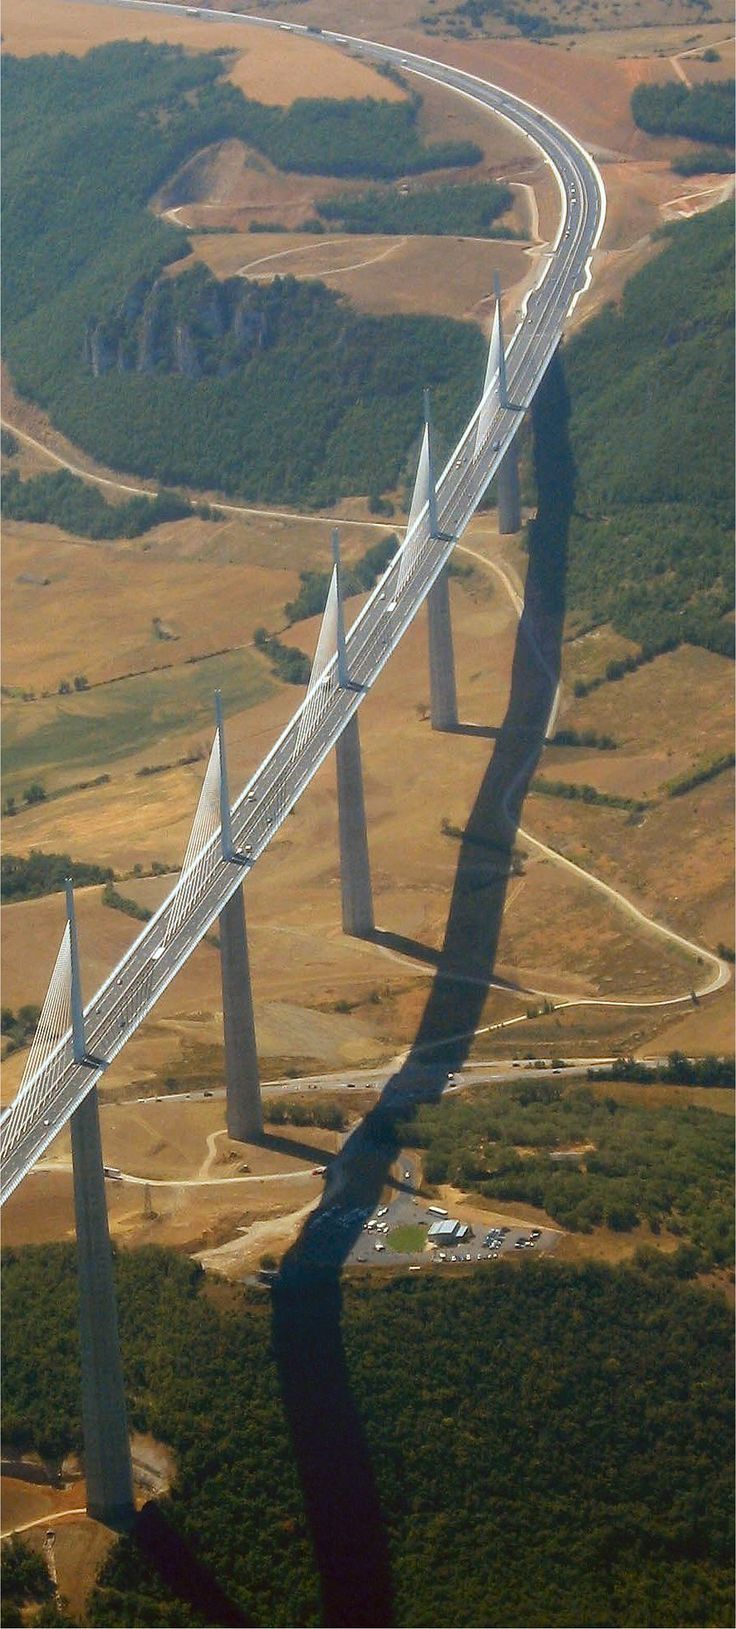 Aerial photography drone : Aerial Photography Milau Viaduct in France #aerialphotography #photography #fr